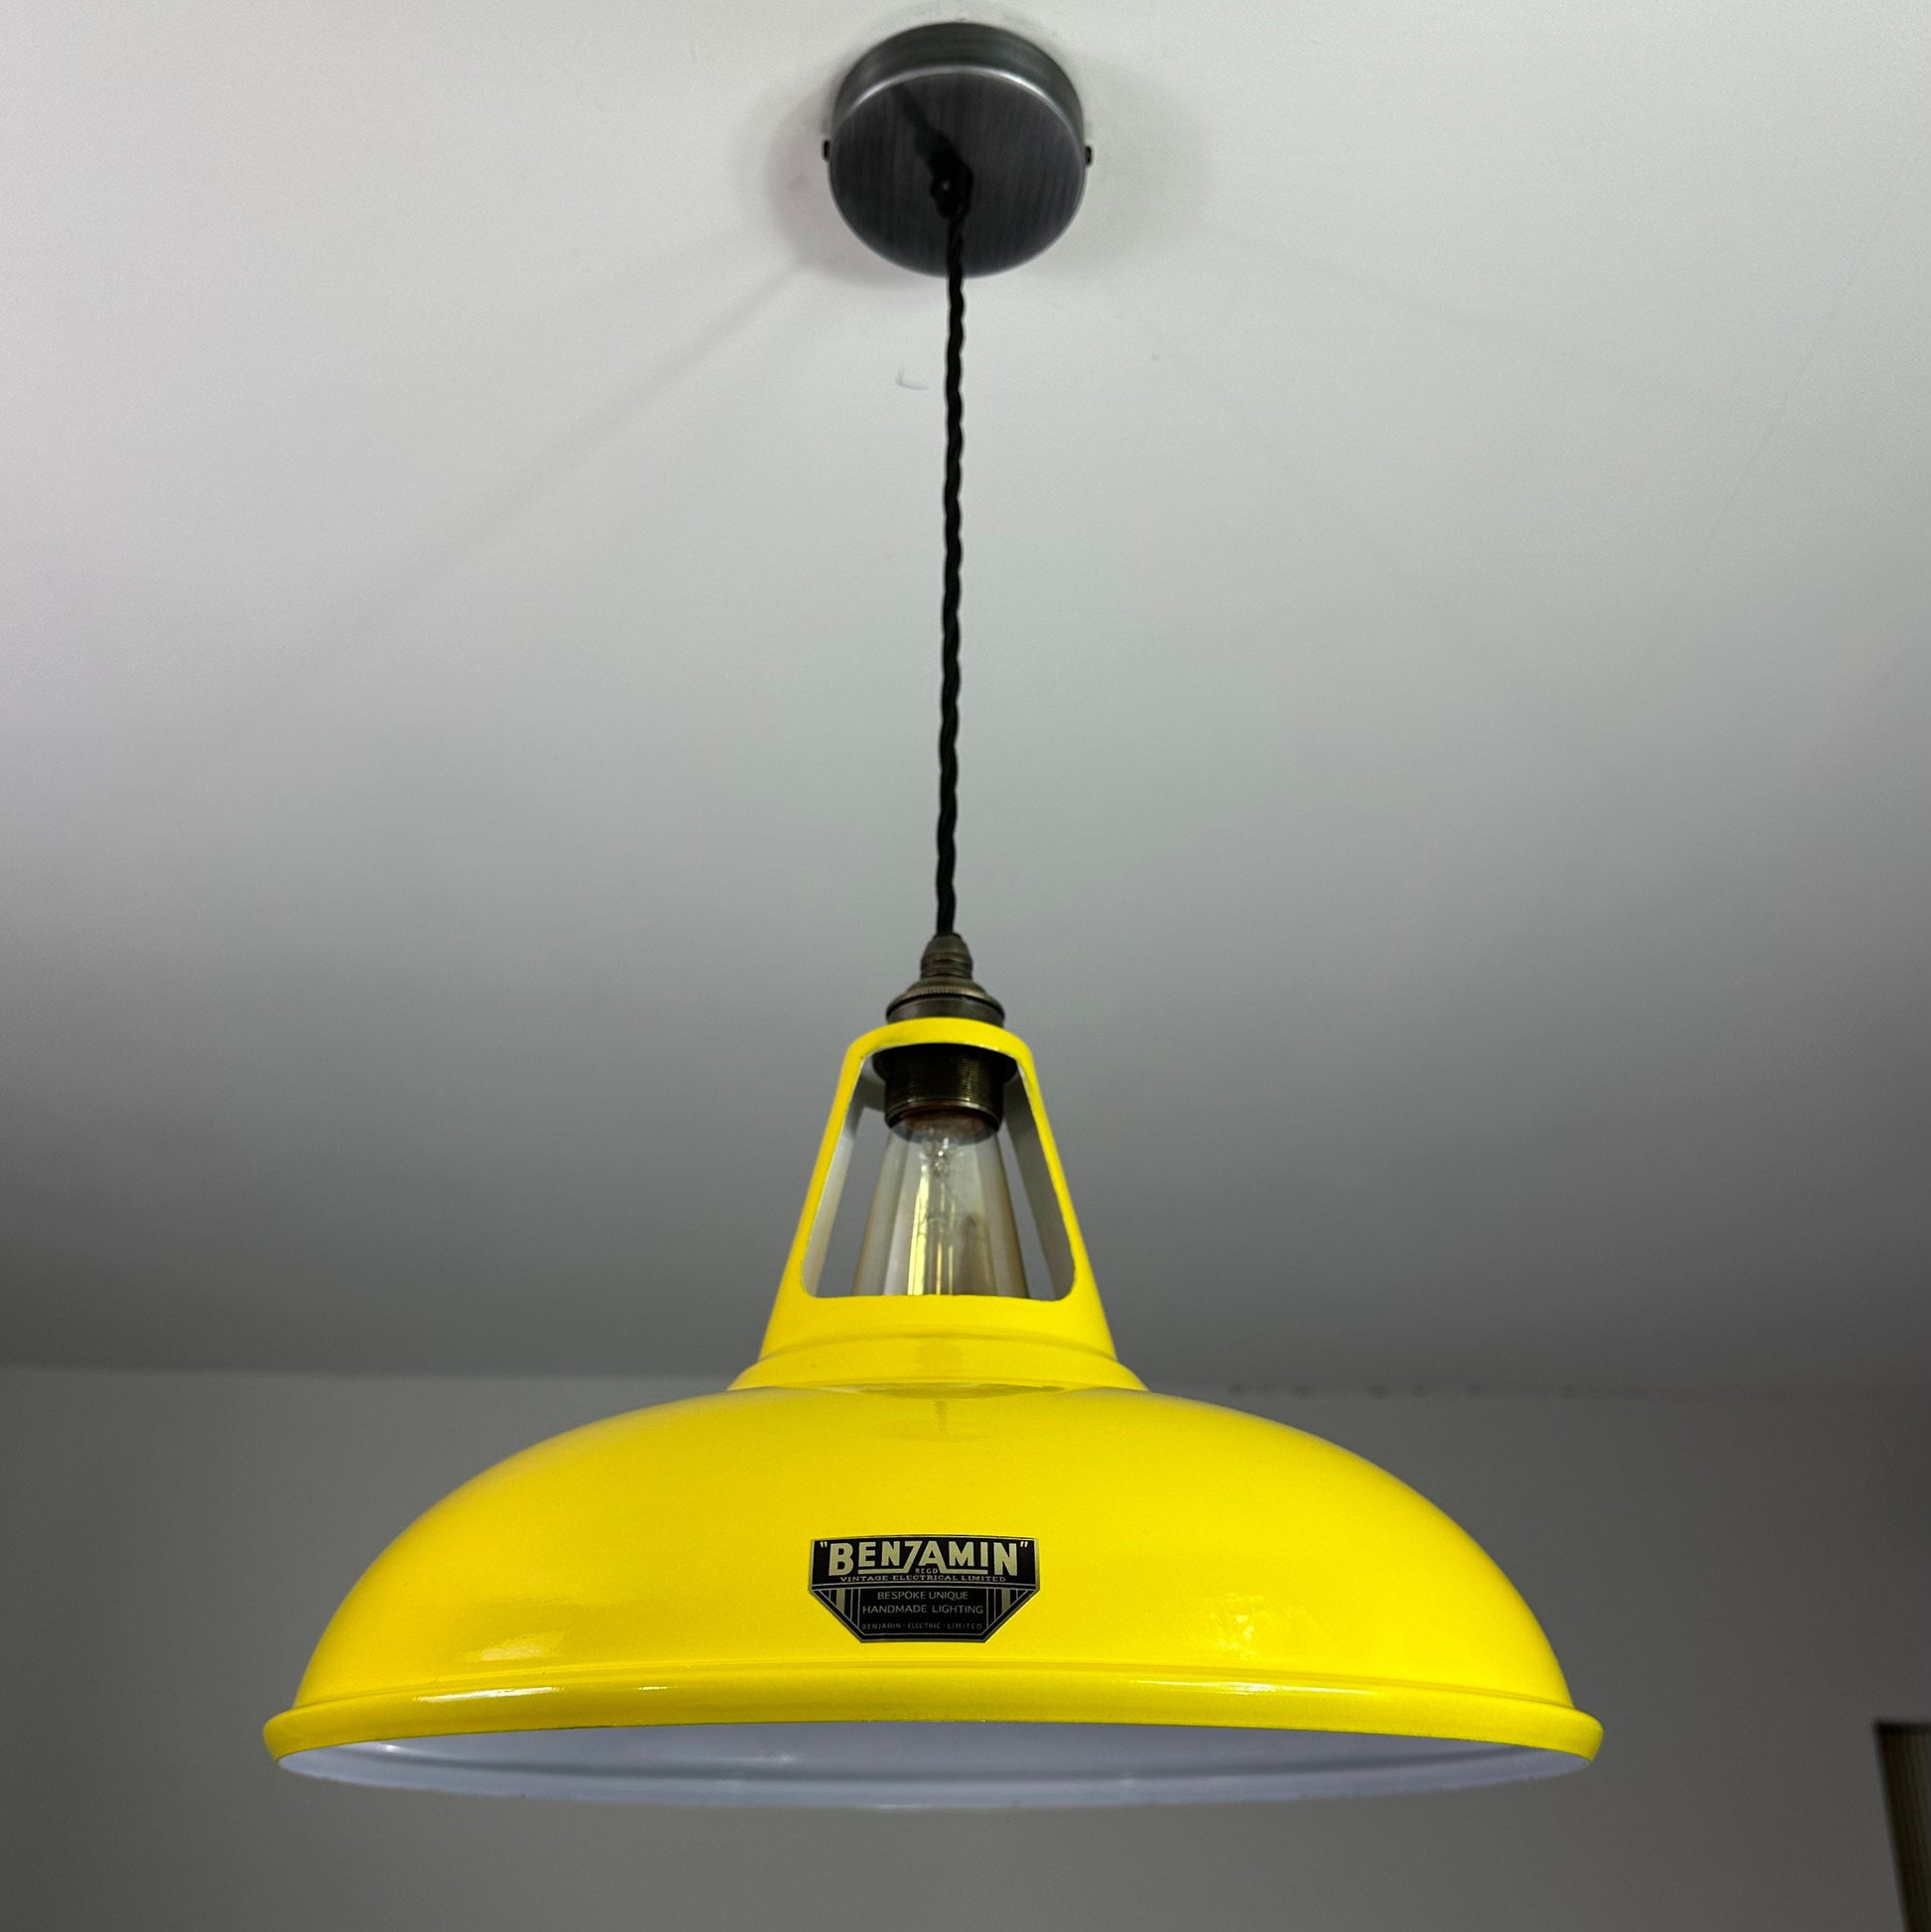 Cawston XL ~ *Worn* Yellow Solid Shade Slotted Design Pendant Set Light | Ceiling Dining Room | Kitchen Table | Vintage Filament Bulb 14 Inch